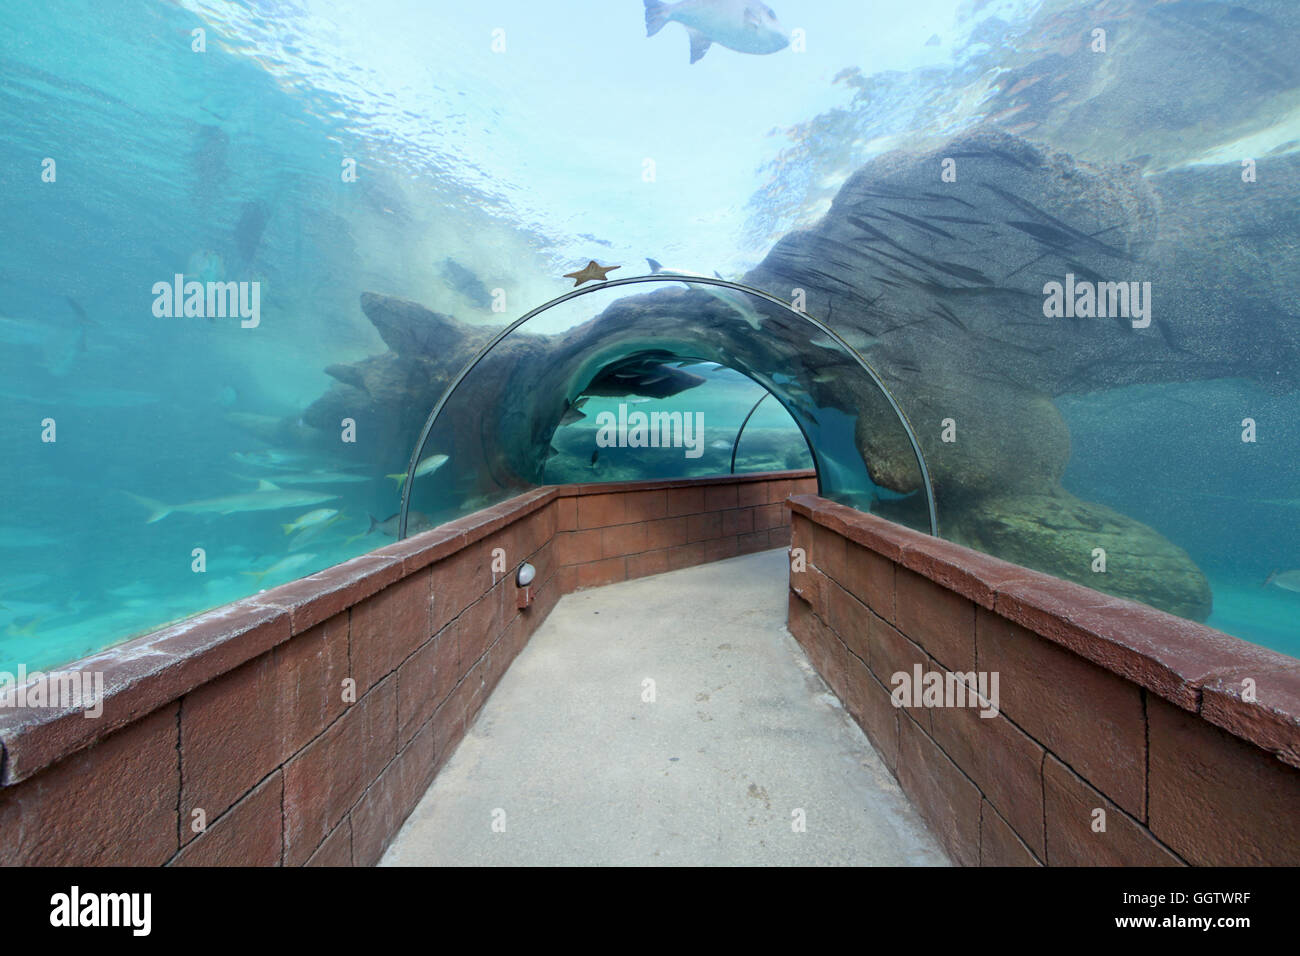 Looking through an Aquarium tunnel with fish Stock Photo